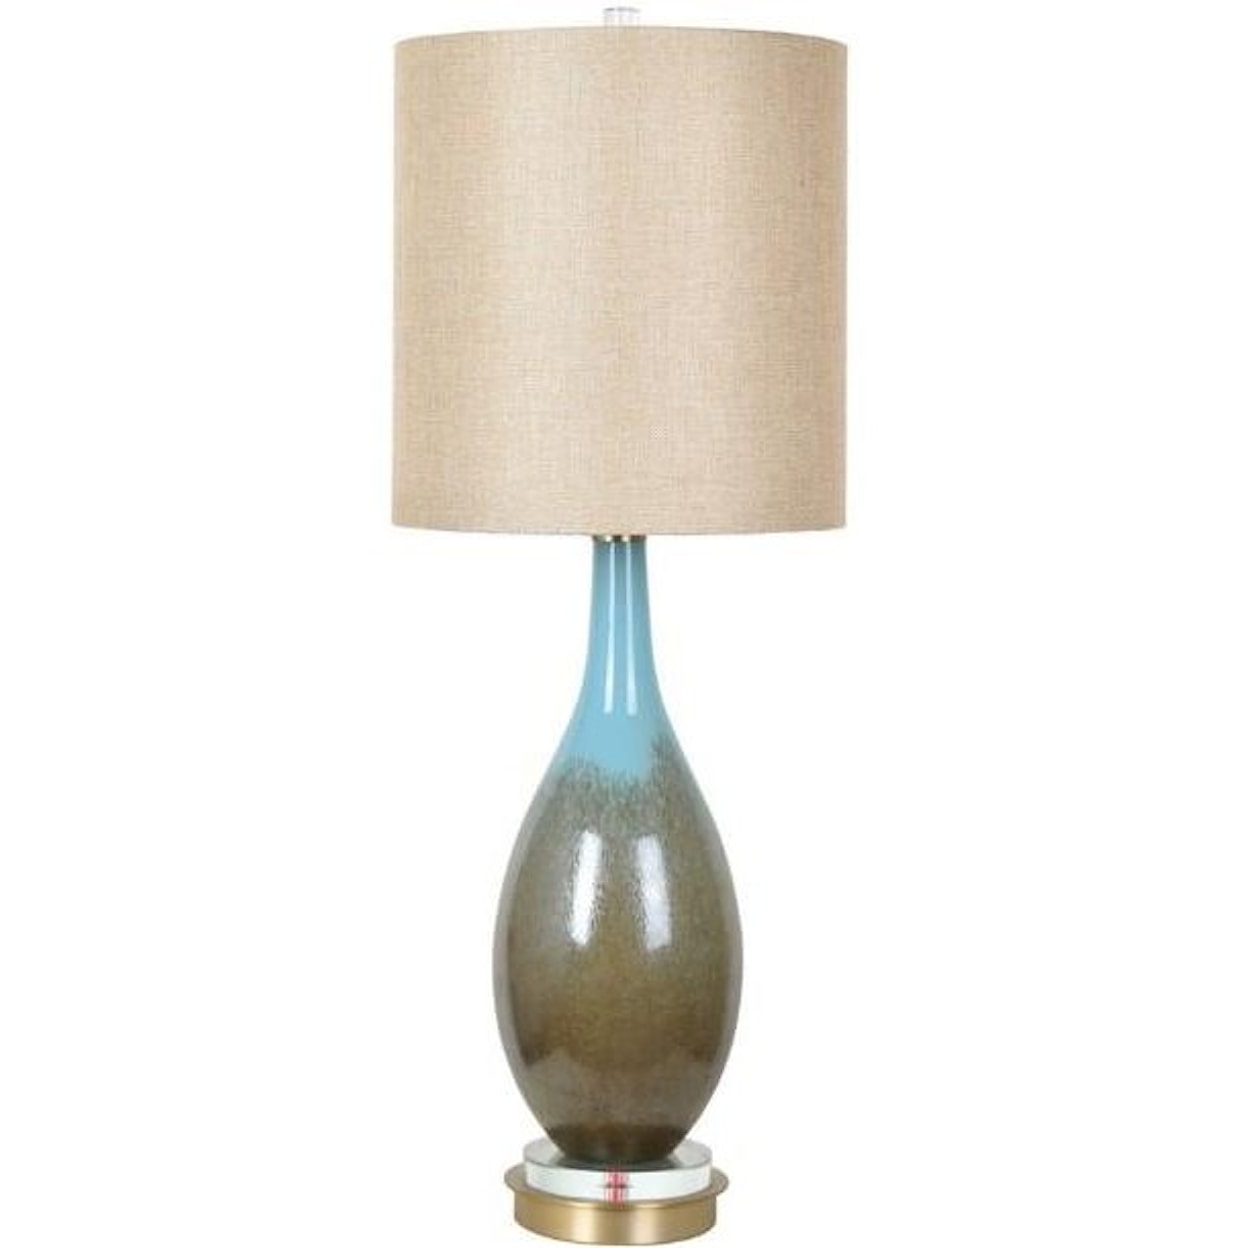 Crestview Collection Lighting Mia Table Lamp